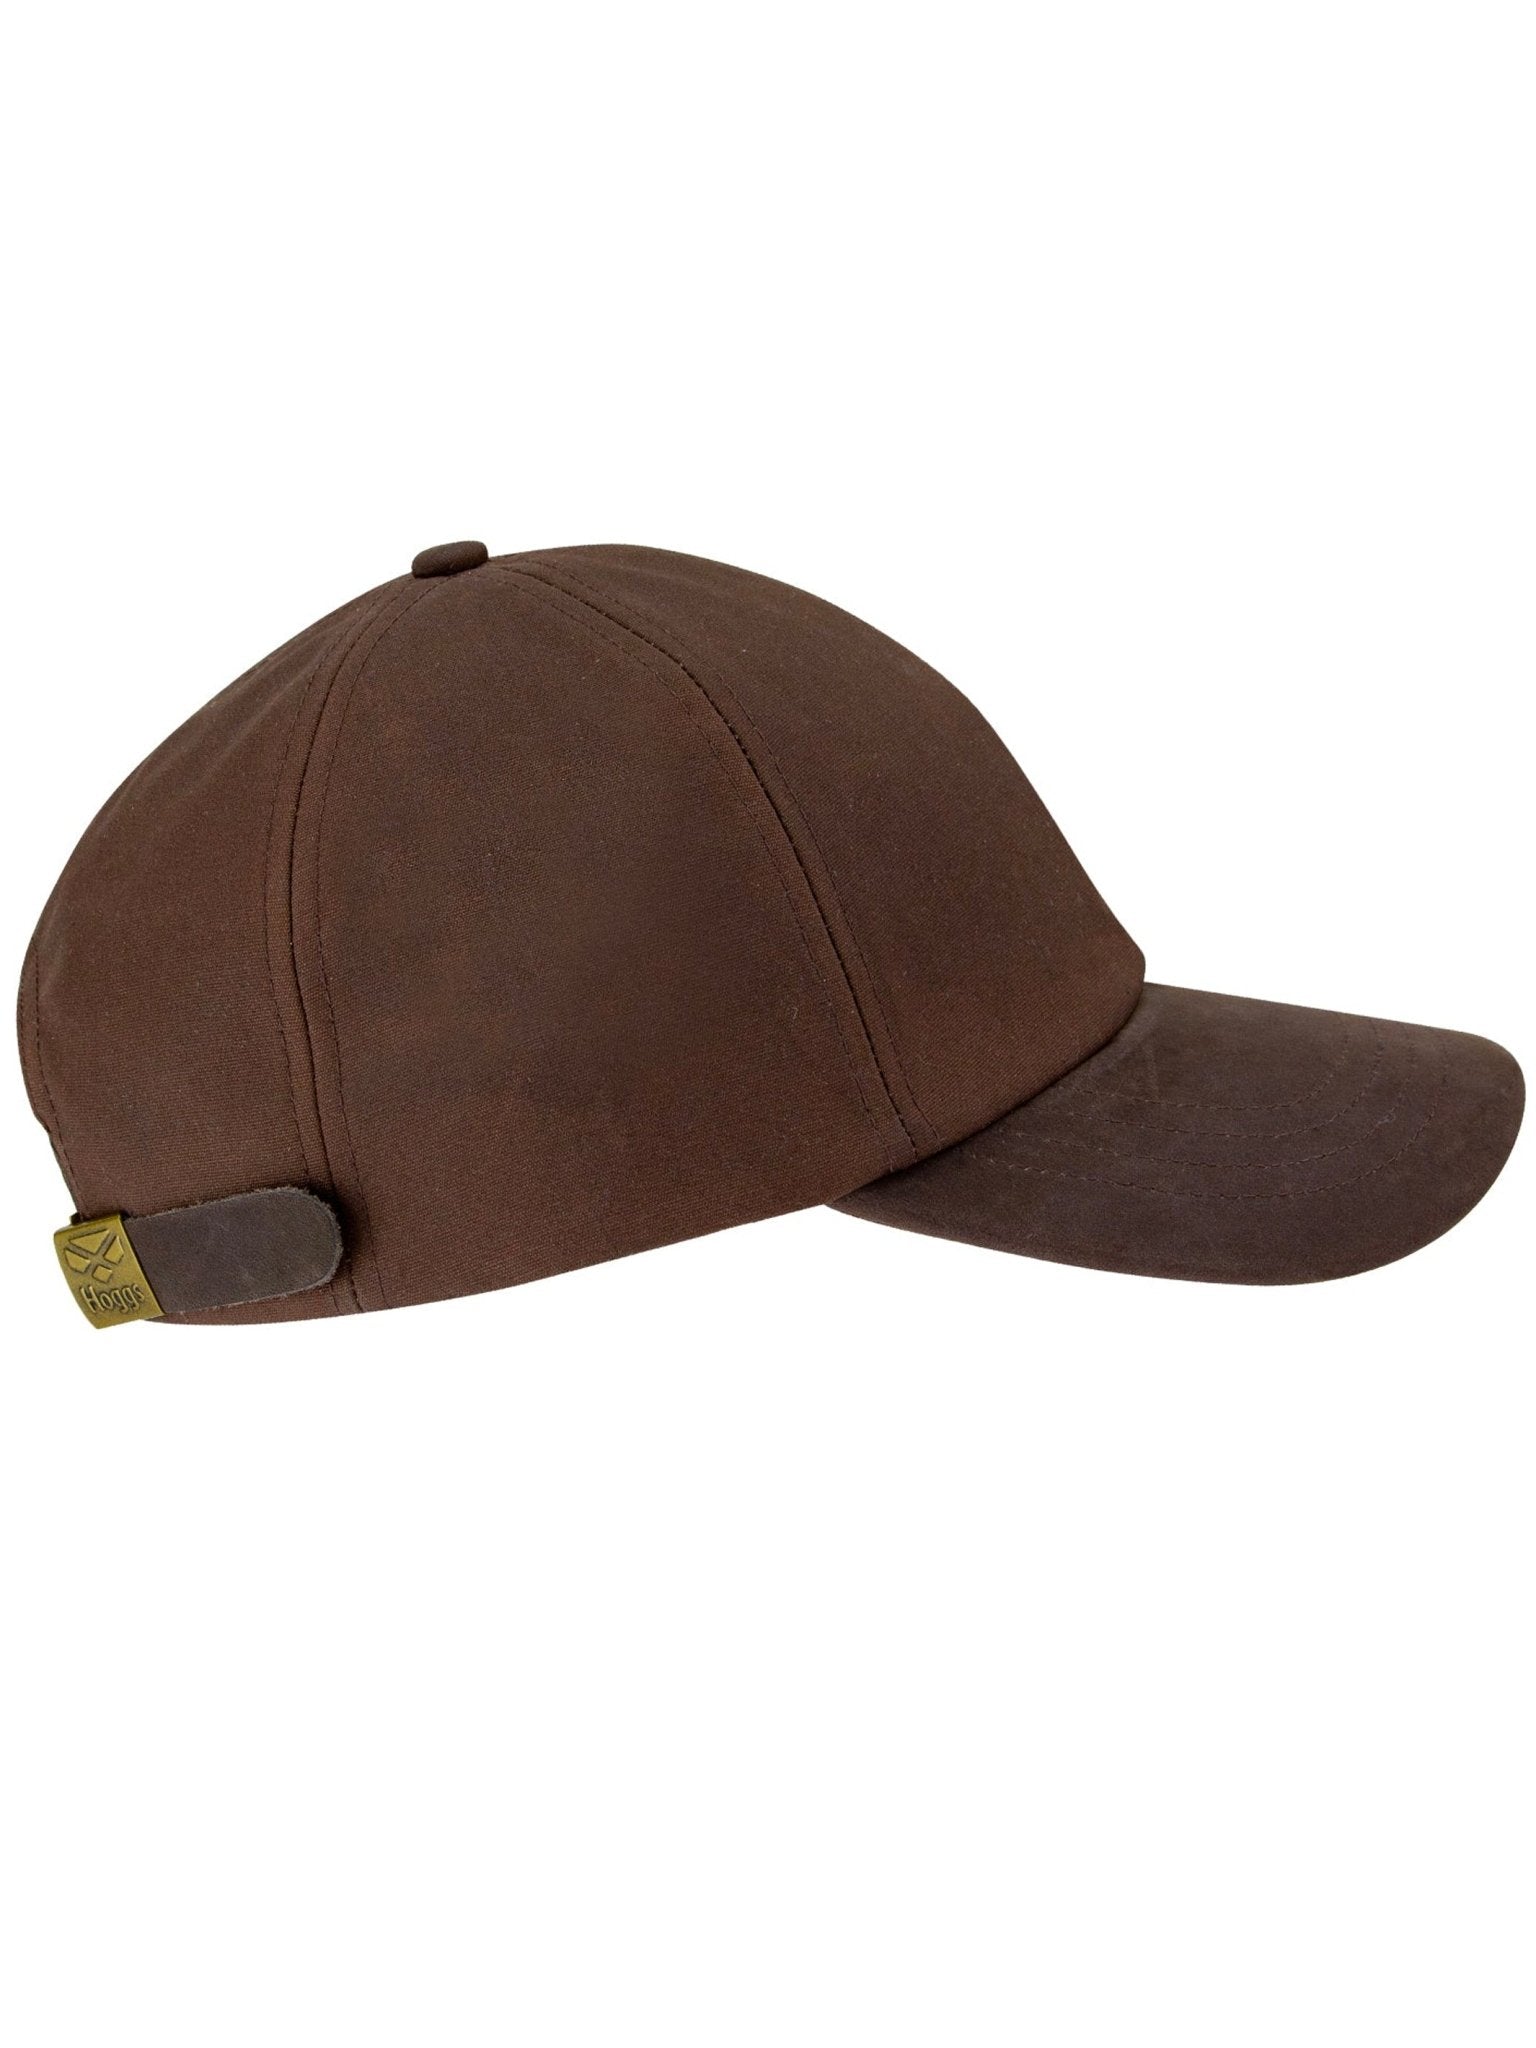 4elementsclothingHoggs of FifeHoggs of Fife - Waxed Water resistant Baseball CapHatsBBCP/BR/1